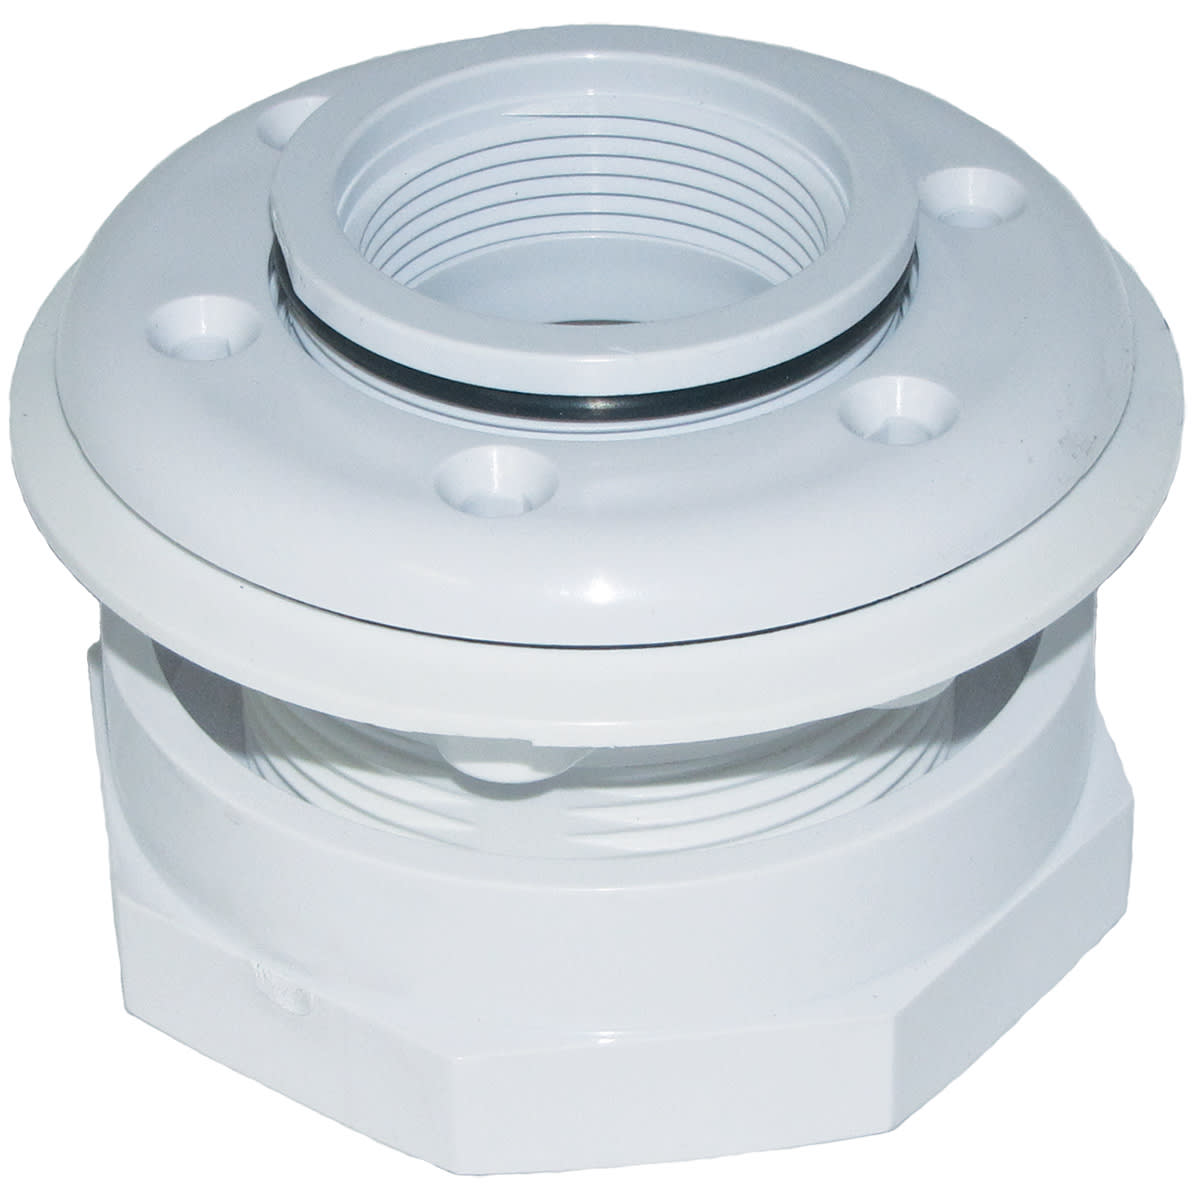 Hayward 2" Inlet Fitting for Liner Pools w/ Face Plate | SP1408S2